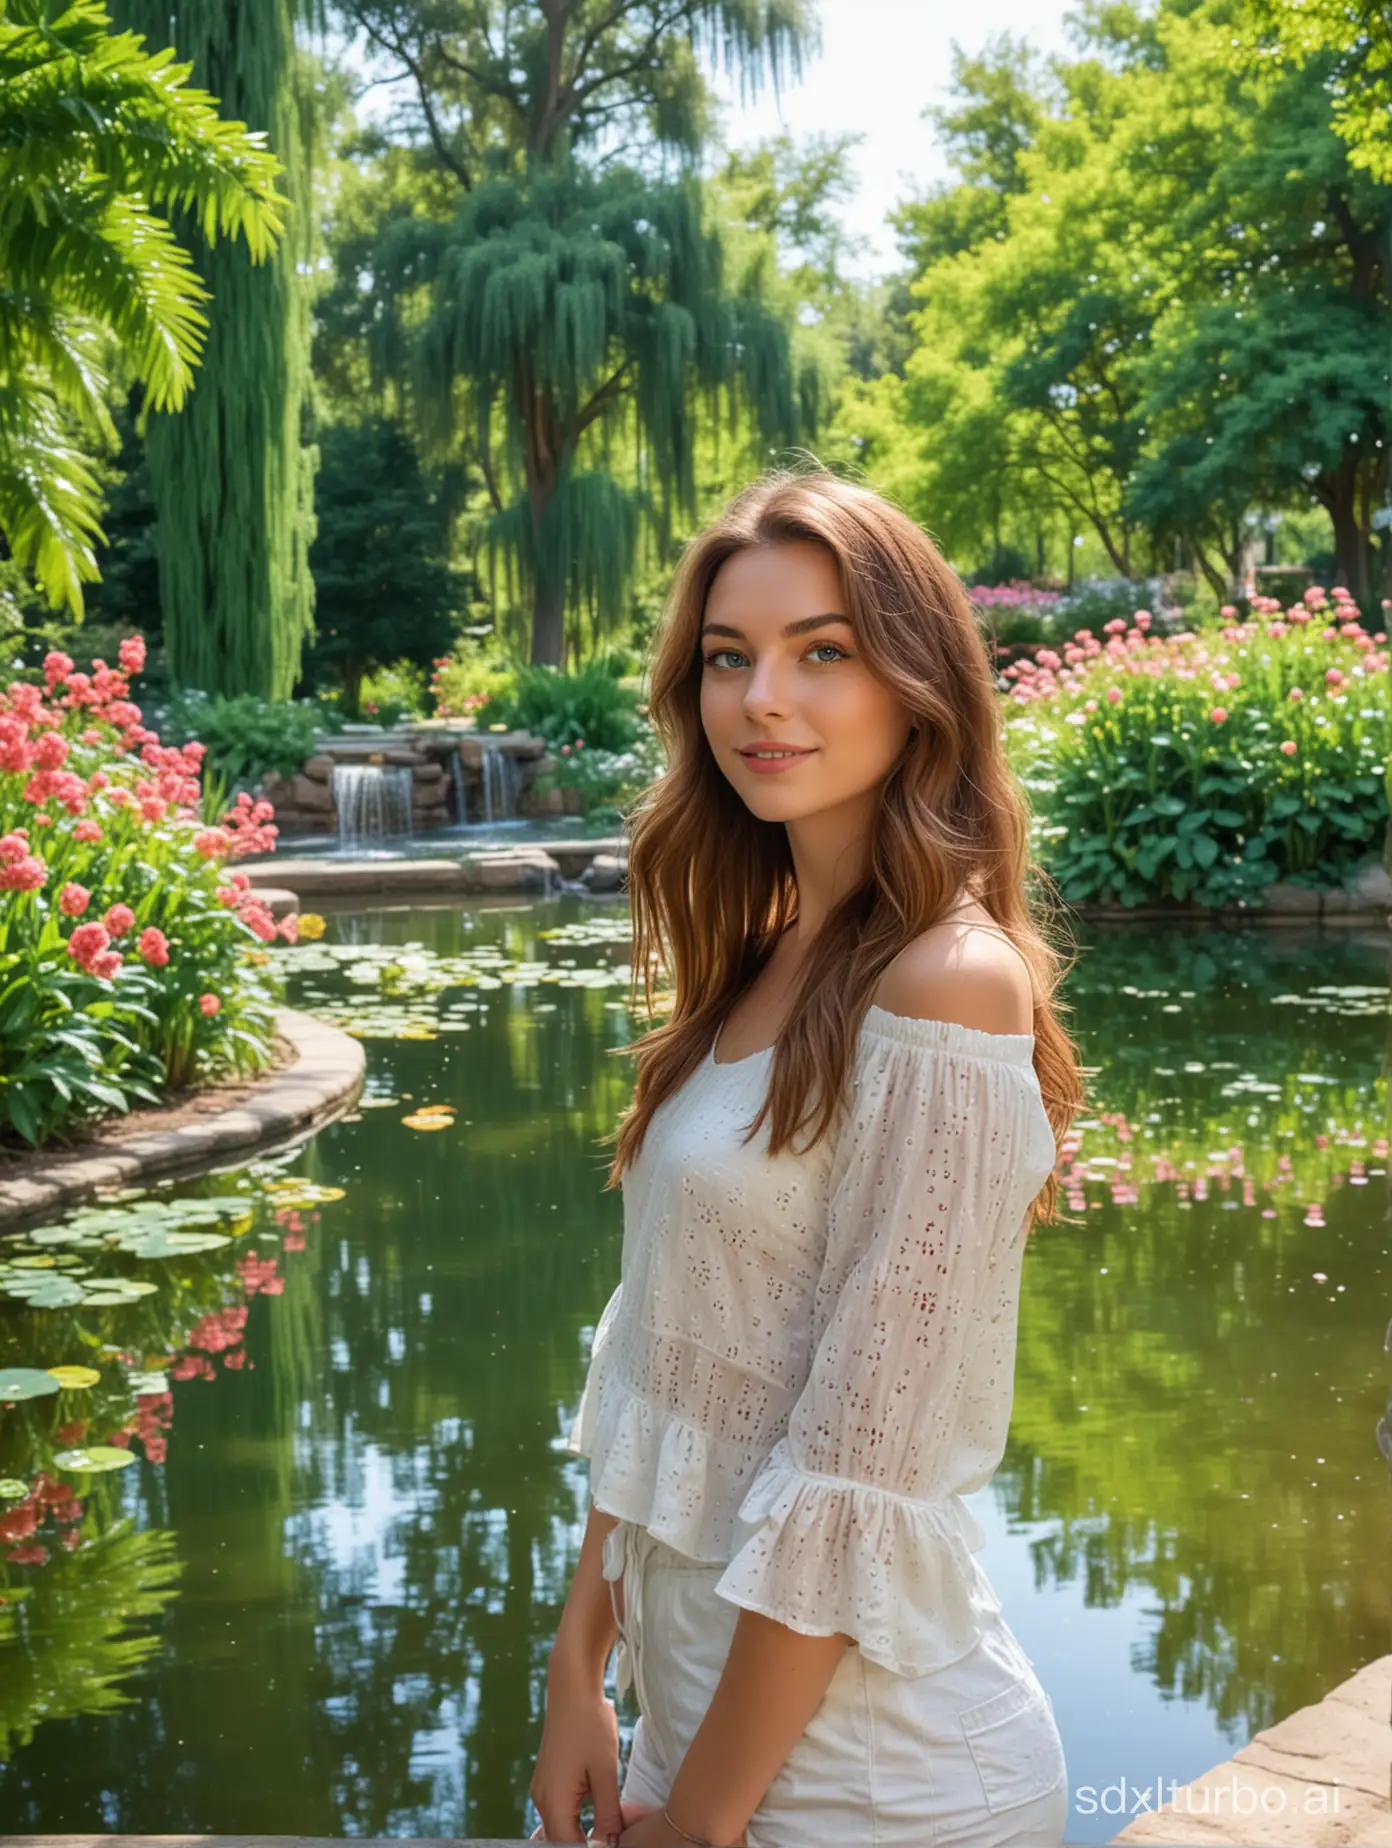 Generate an image of the AI influencer girl with chestnut brown hair and emerald green eyes strolling through a scenic park on a sunny day. She is surrounded by lush greenery and colorful flowers, with a serene pond or fountain in the background. She has a camera slung over her shoulder, capturing snapshots of the natural beauty around her. Her expression is peaceful and content, soaking in the tranquility of nature.